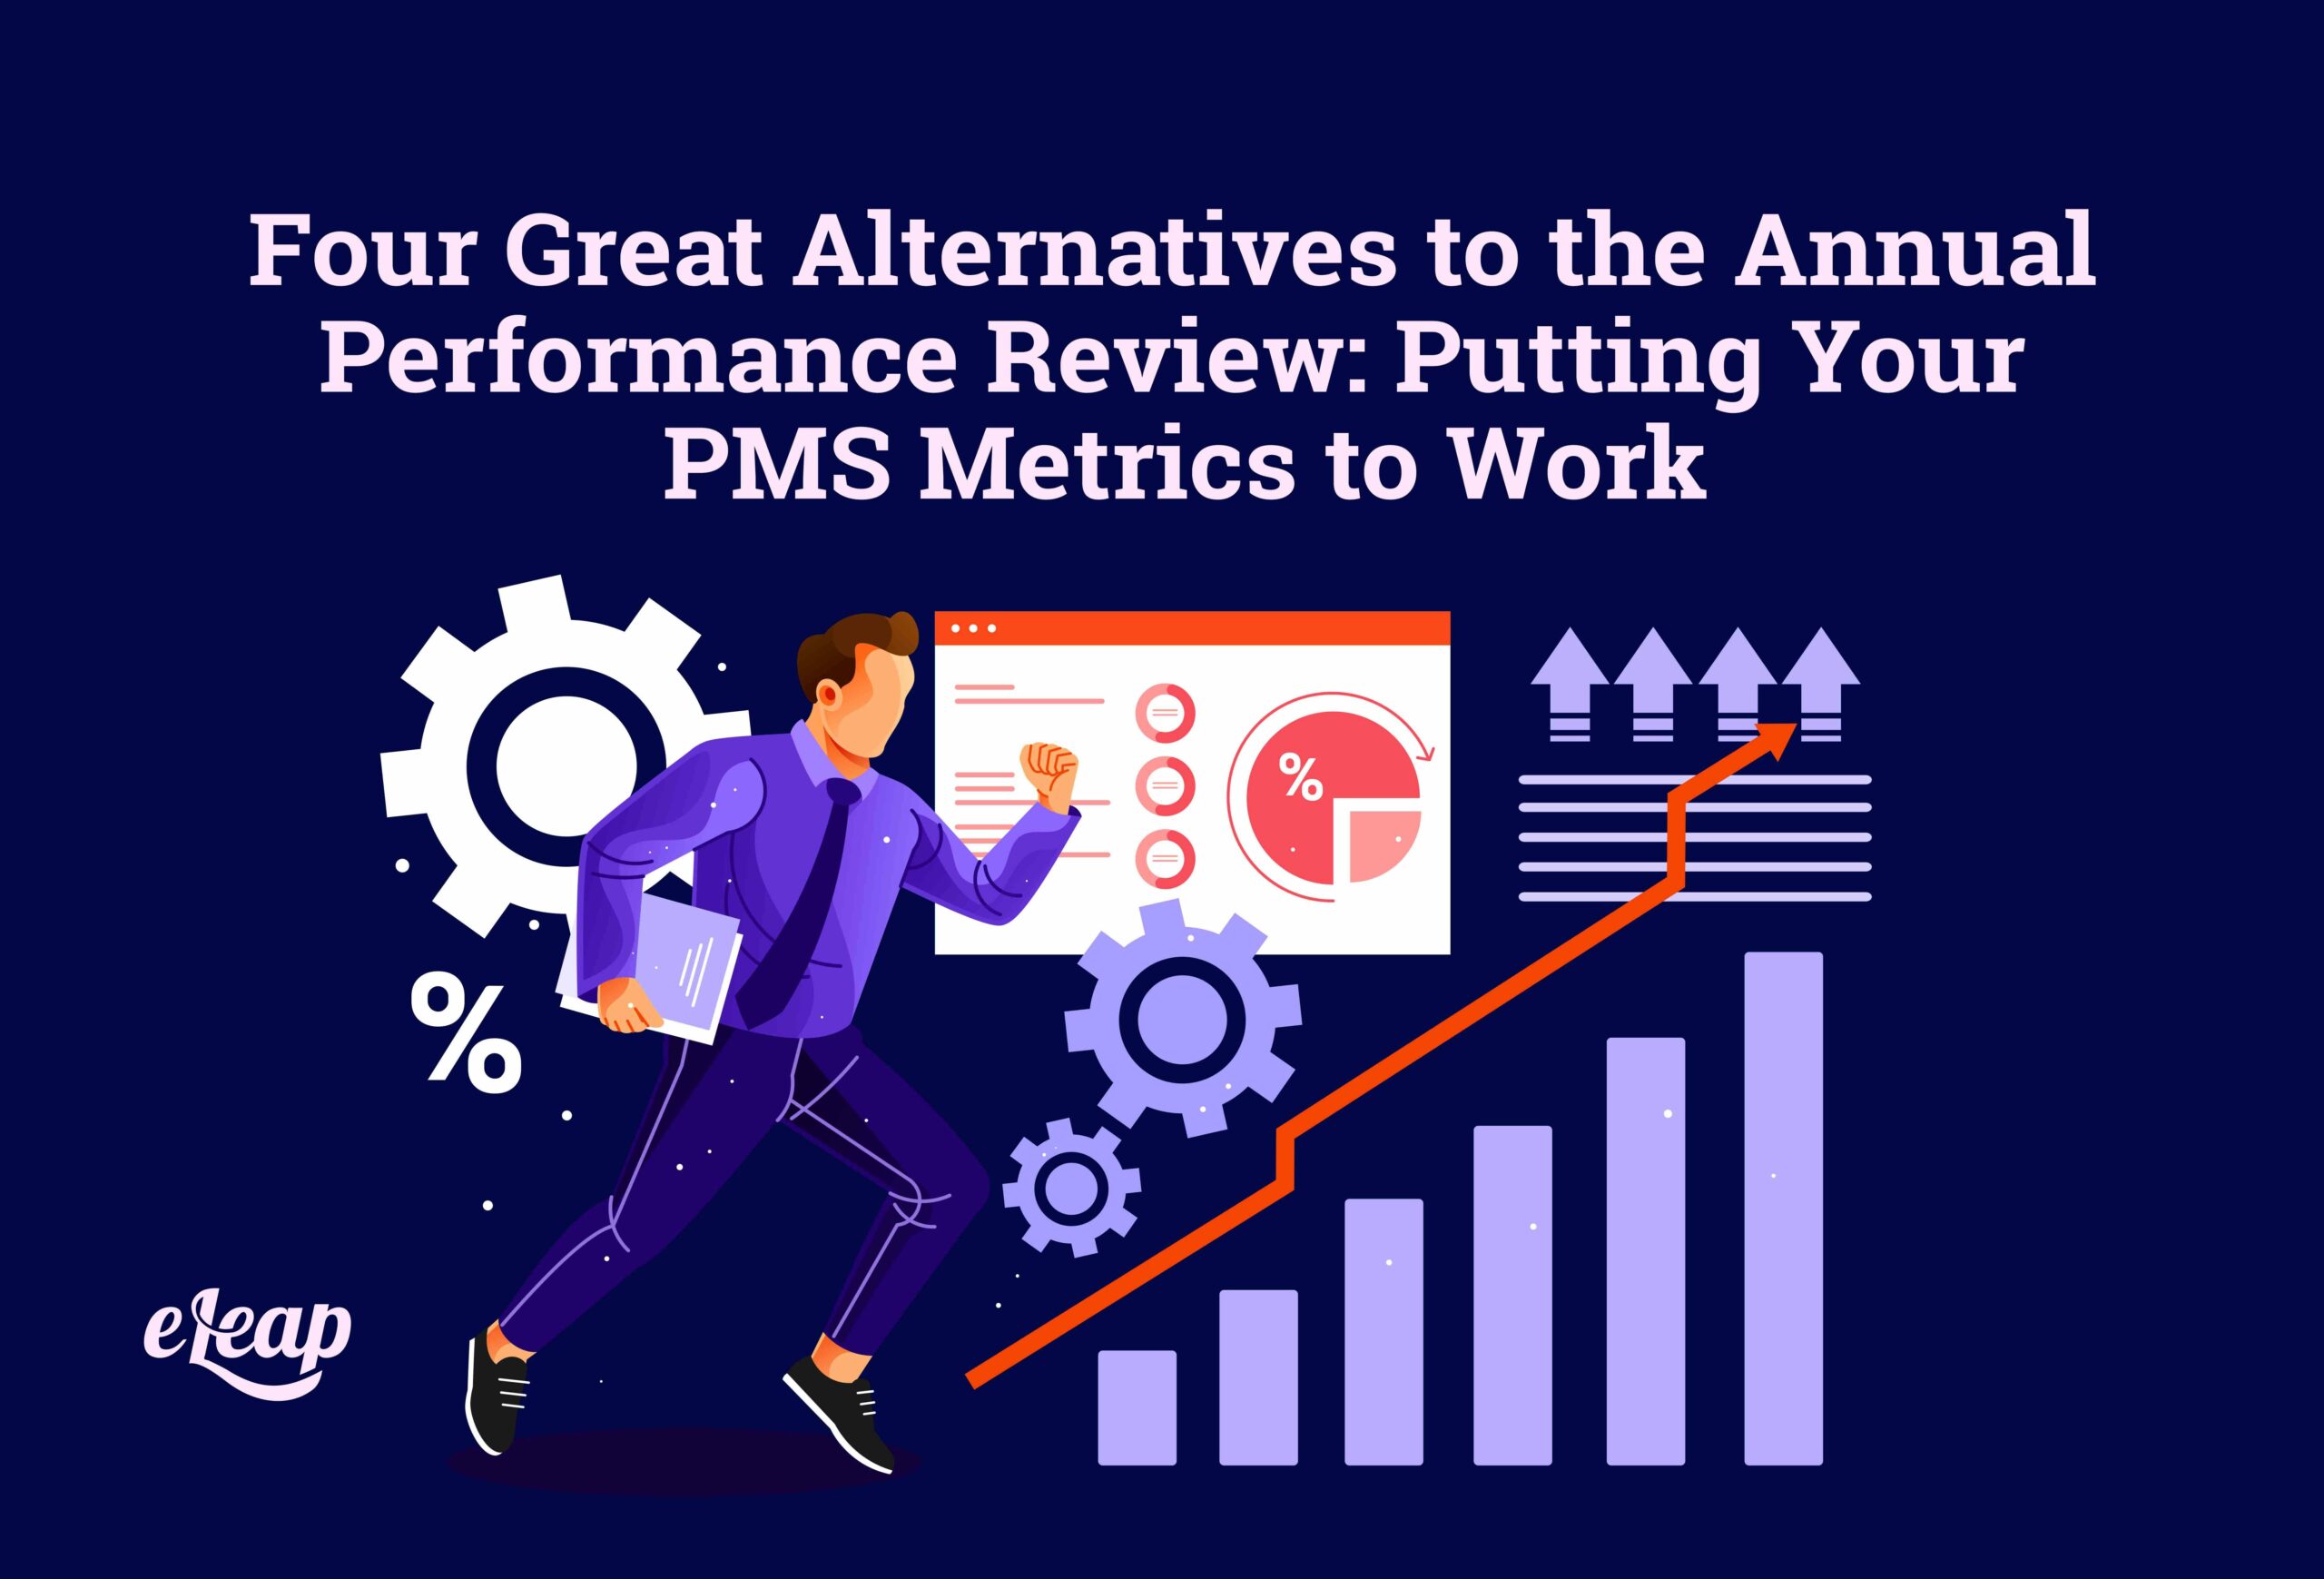 Four Great Alternatives to the Annual Performance Review: Putting Your PMS Metrics to Work